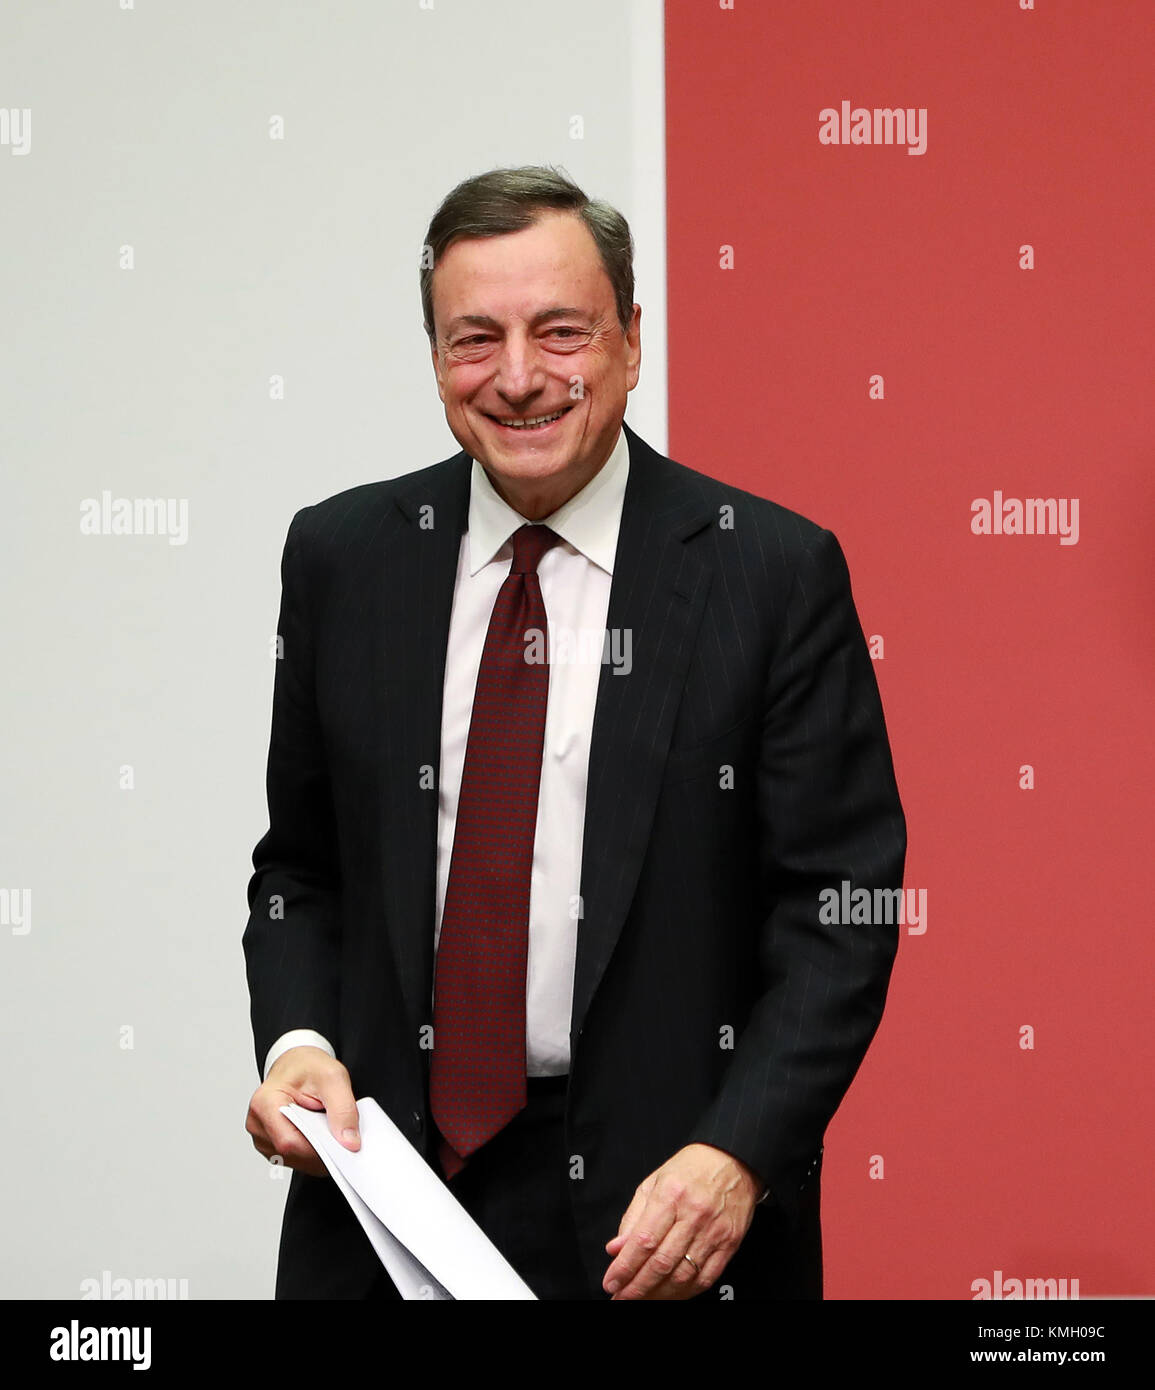 Frankfurt, Germany. 7th Dec, 2017. The European Central Bank (ECB) President Mario Draghi attends a news conference at the ECB headquarters in Frankfurt, Germany, Dec. 7, 2017. Credit: Luo Huanhuan/Xinhua/Alamy Live News Stock Photo